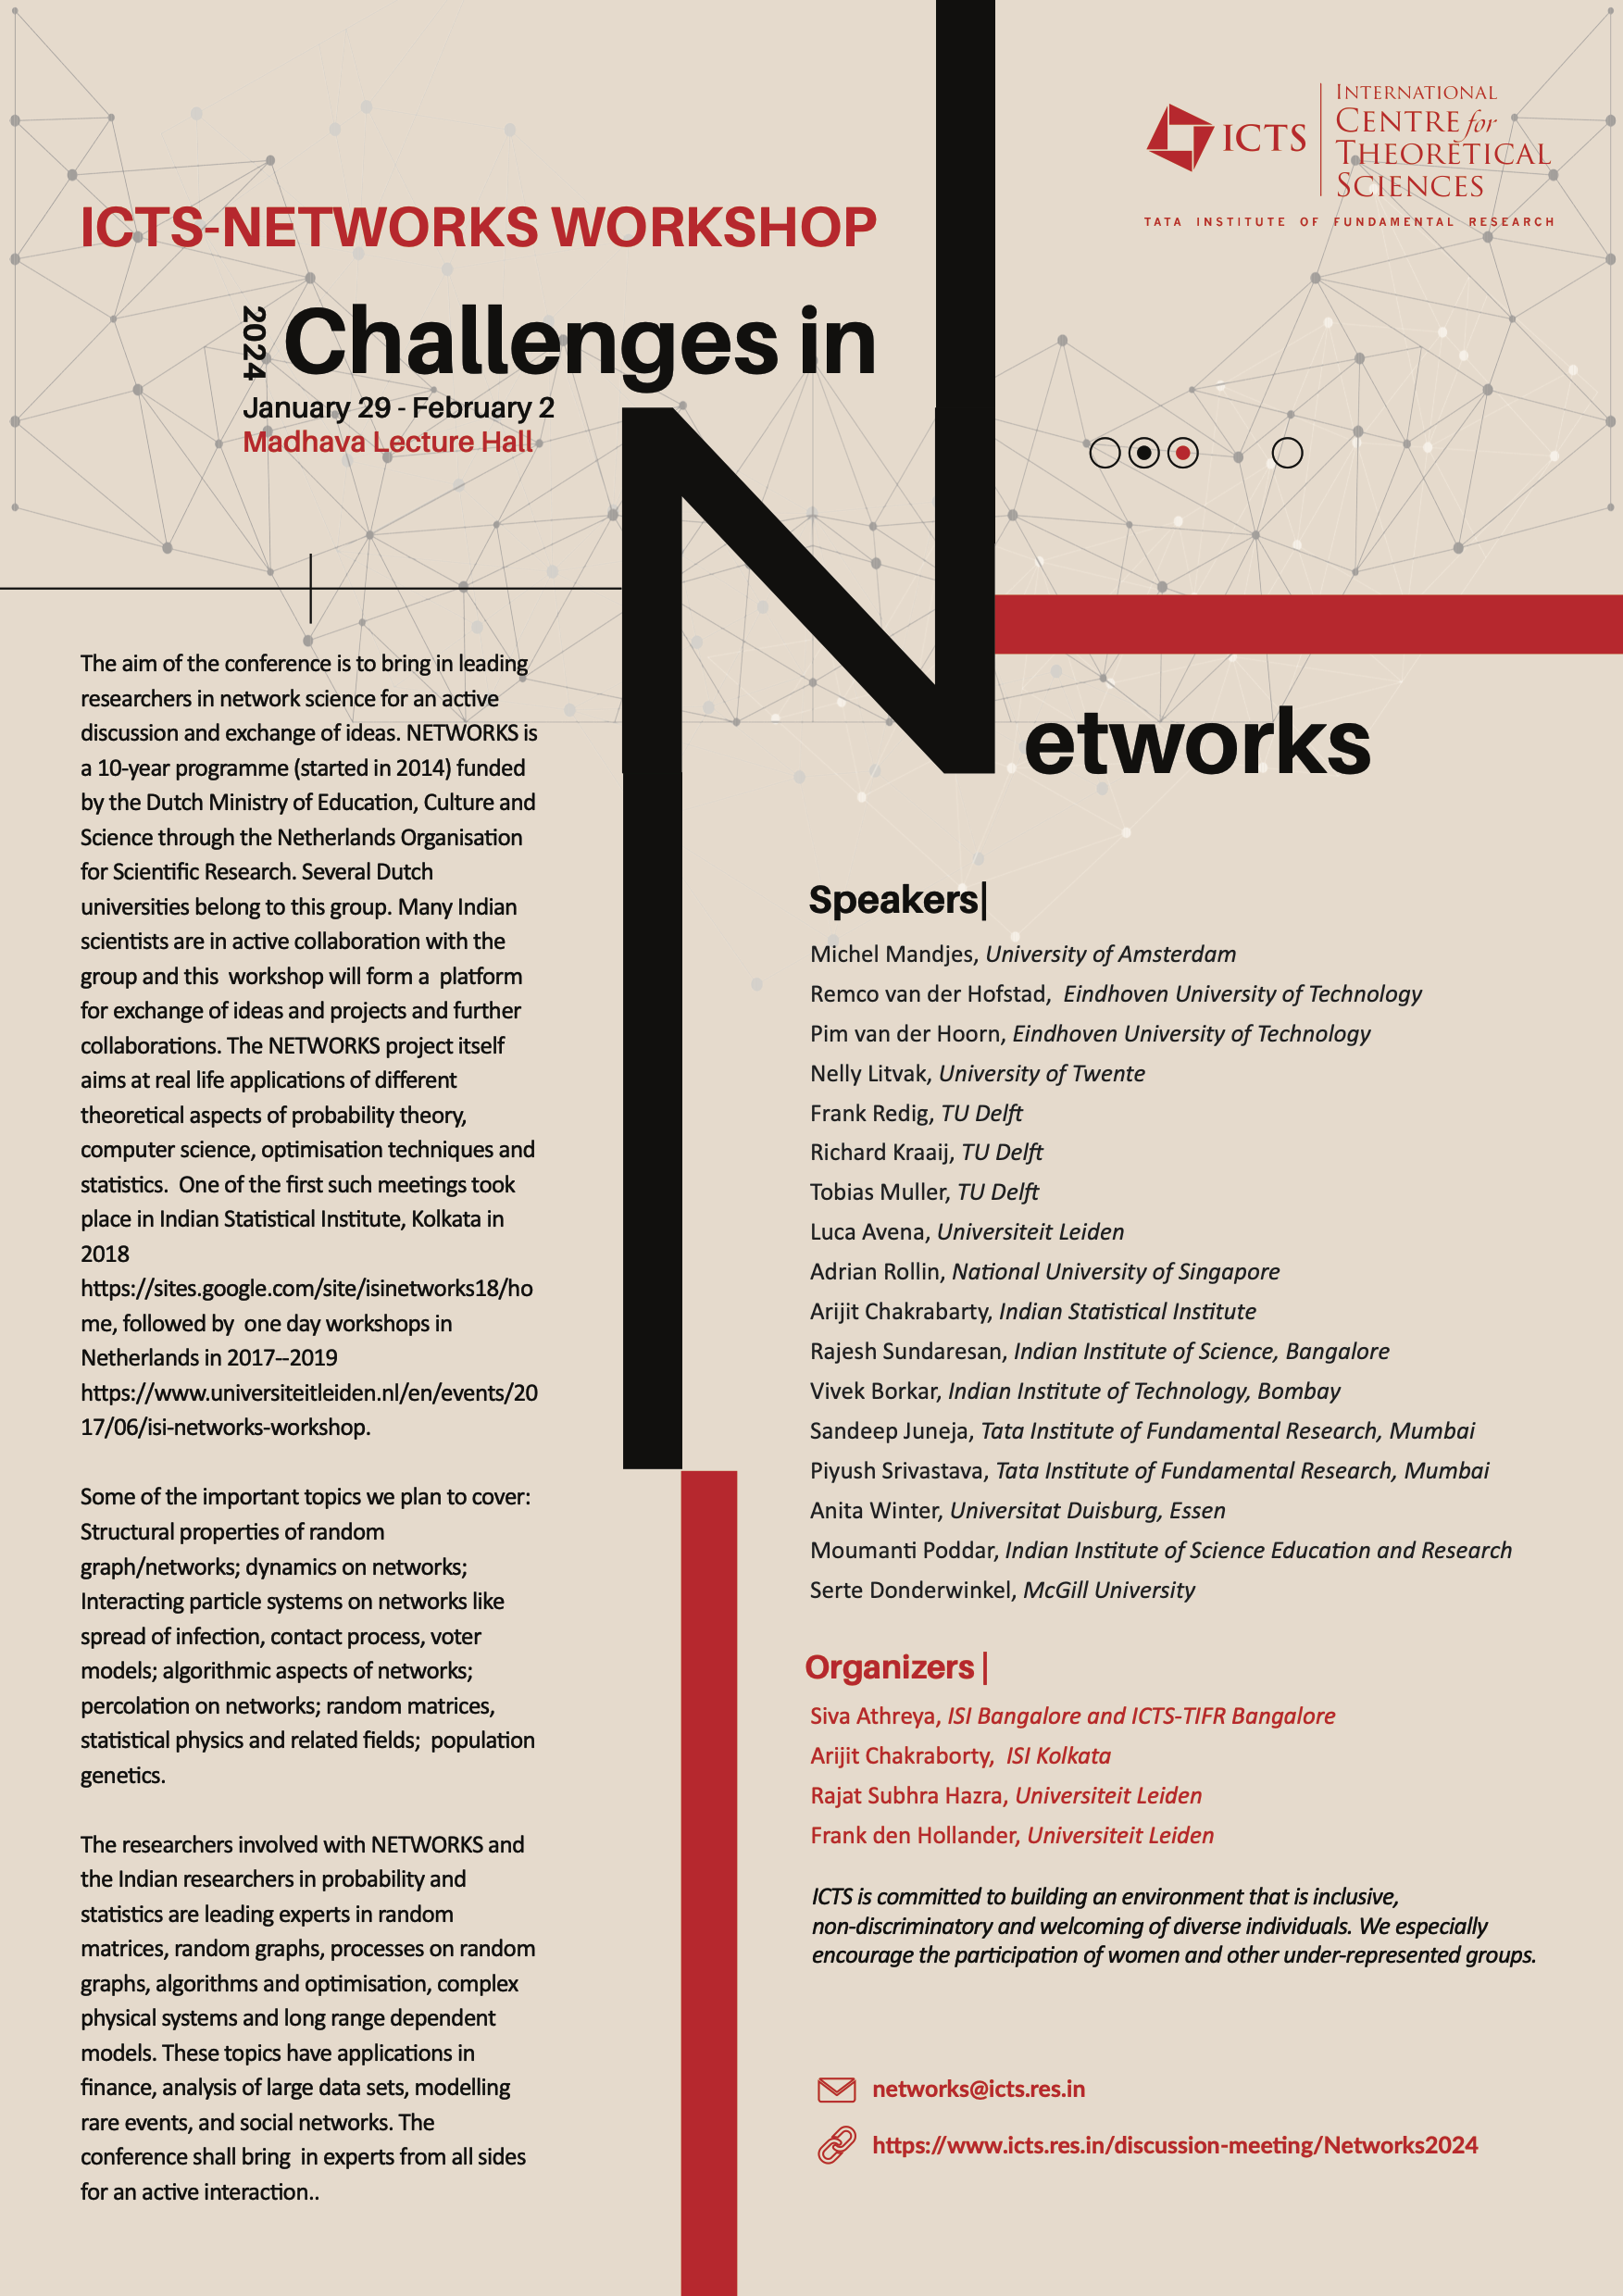 “Challenges in Networks” ICTS